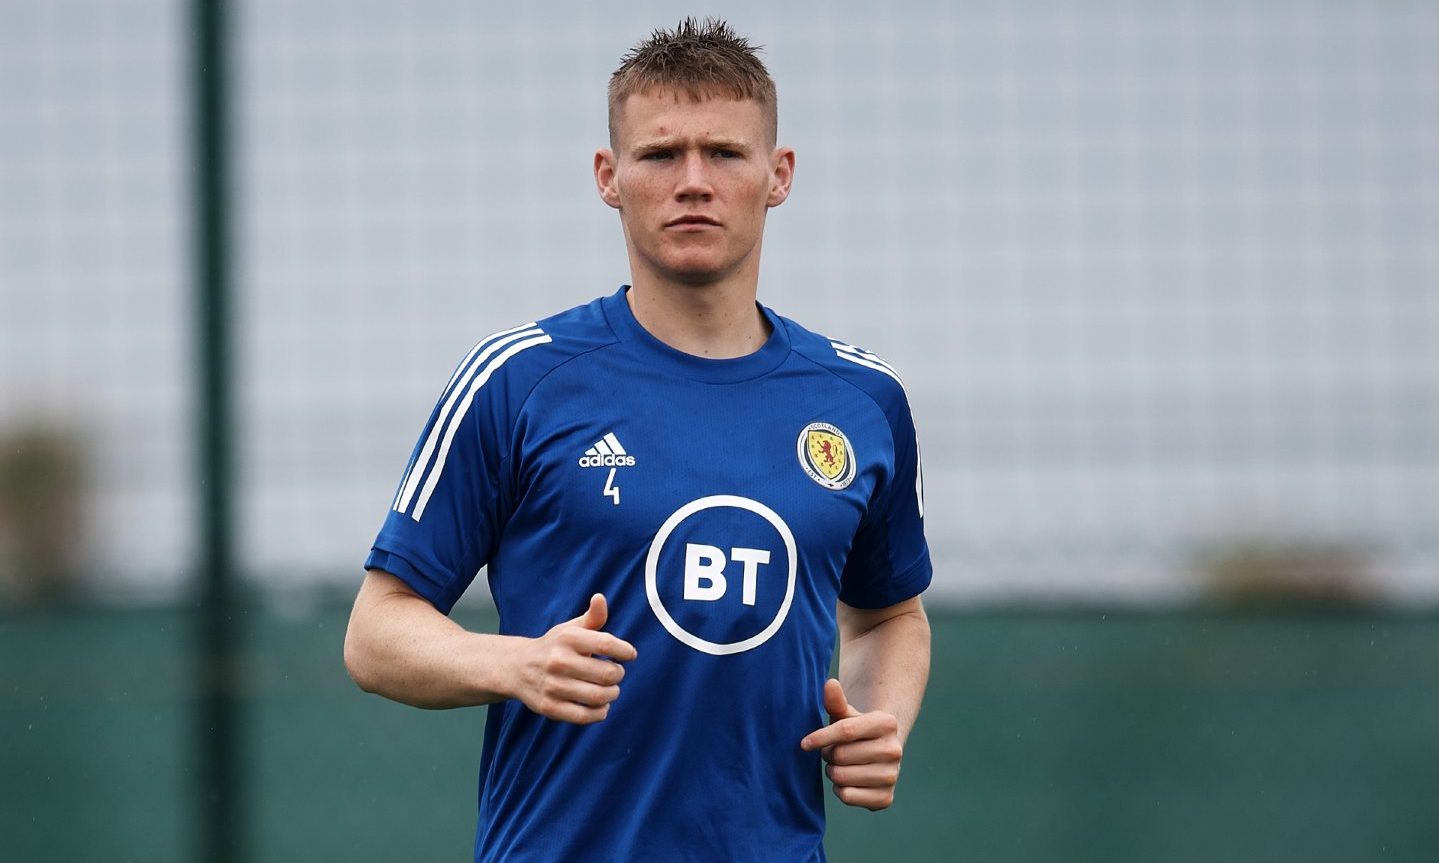 Scott McTominay starts for Scotland against Luxembourg.